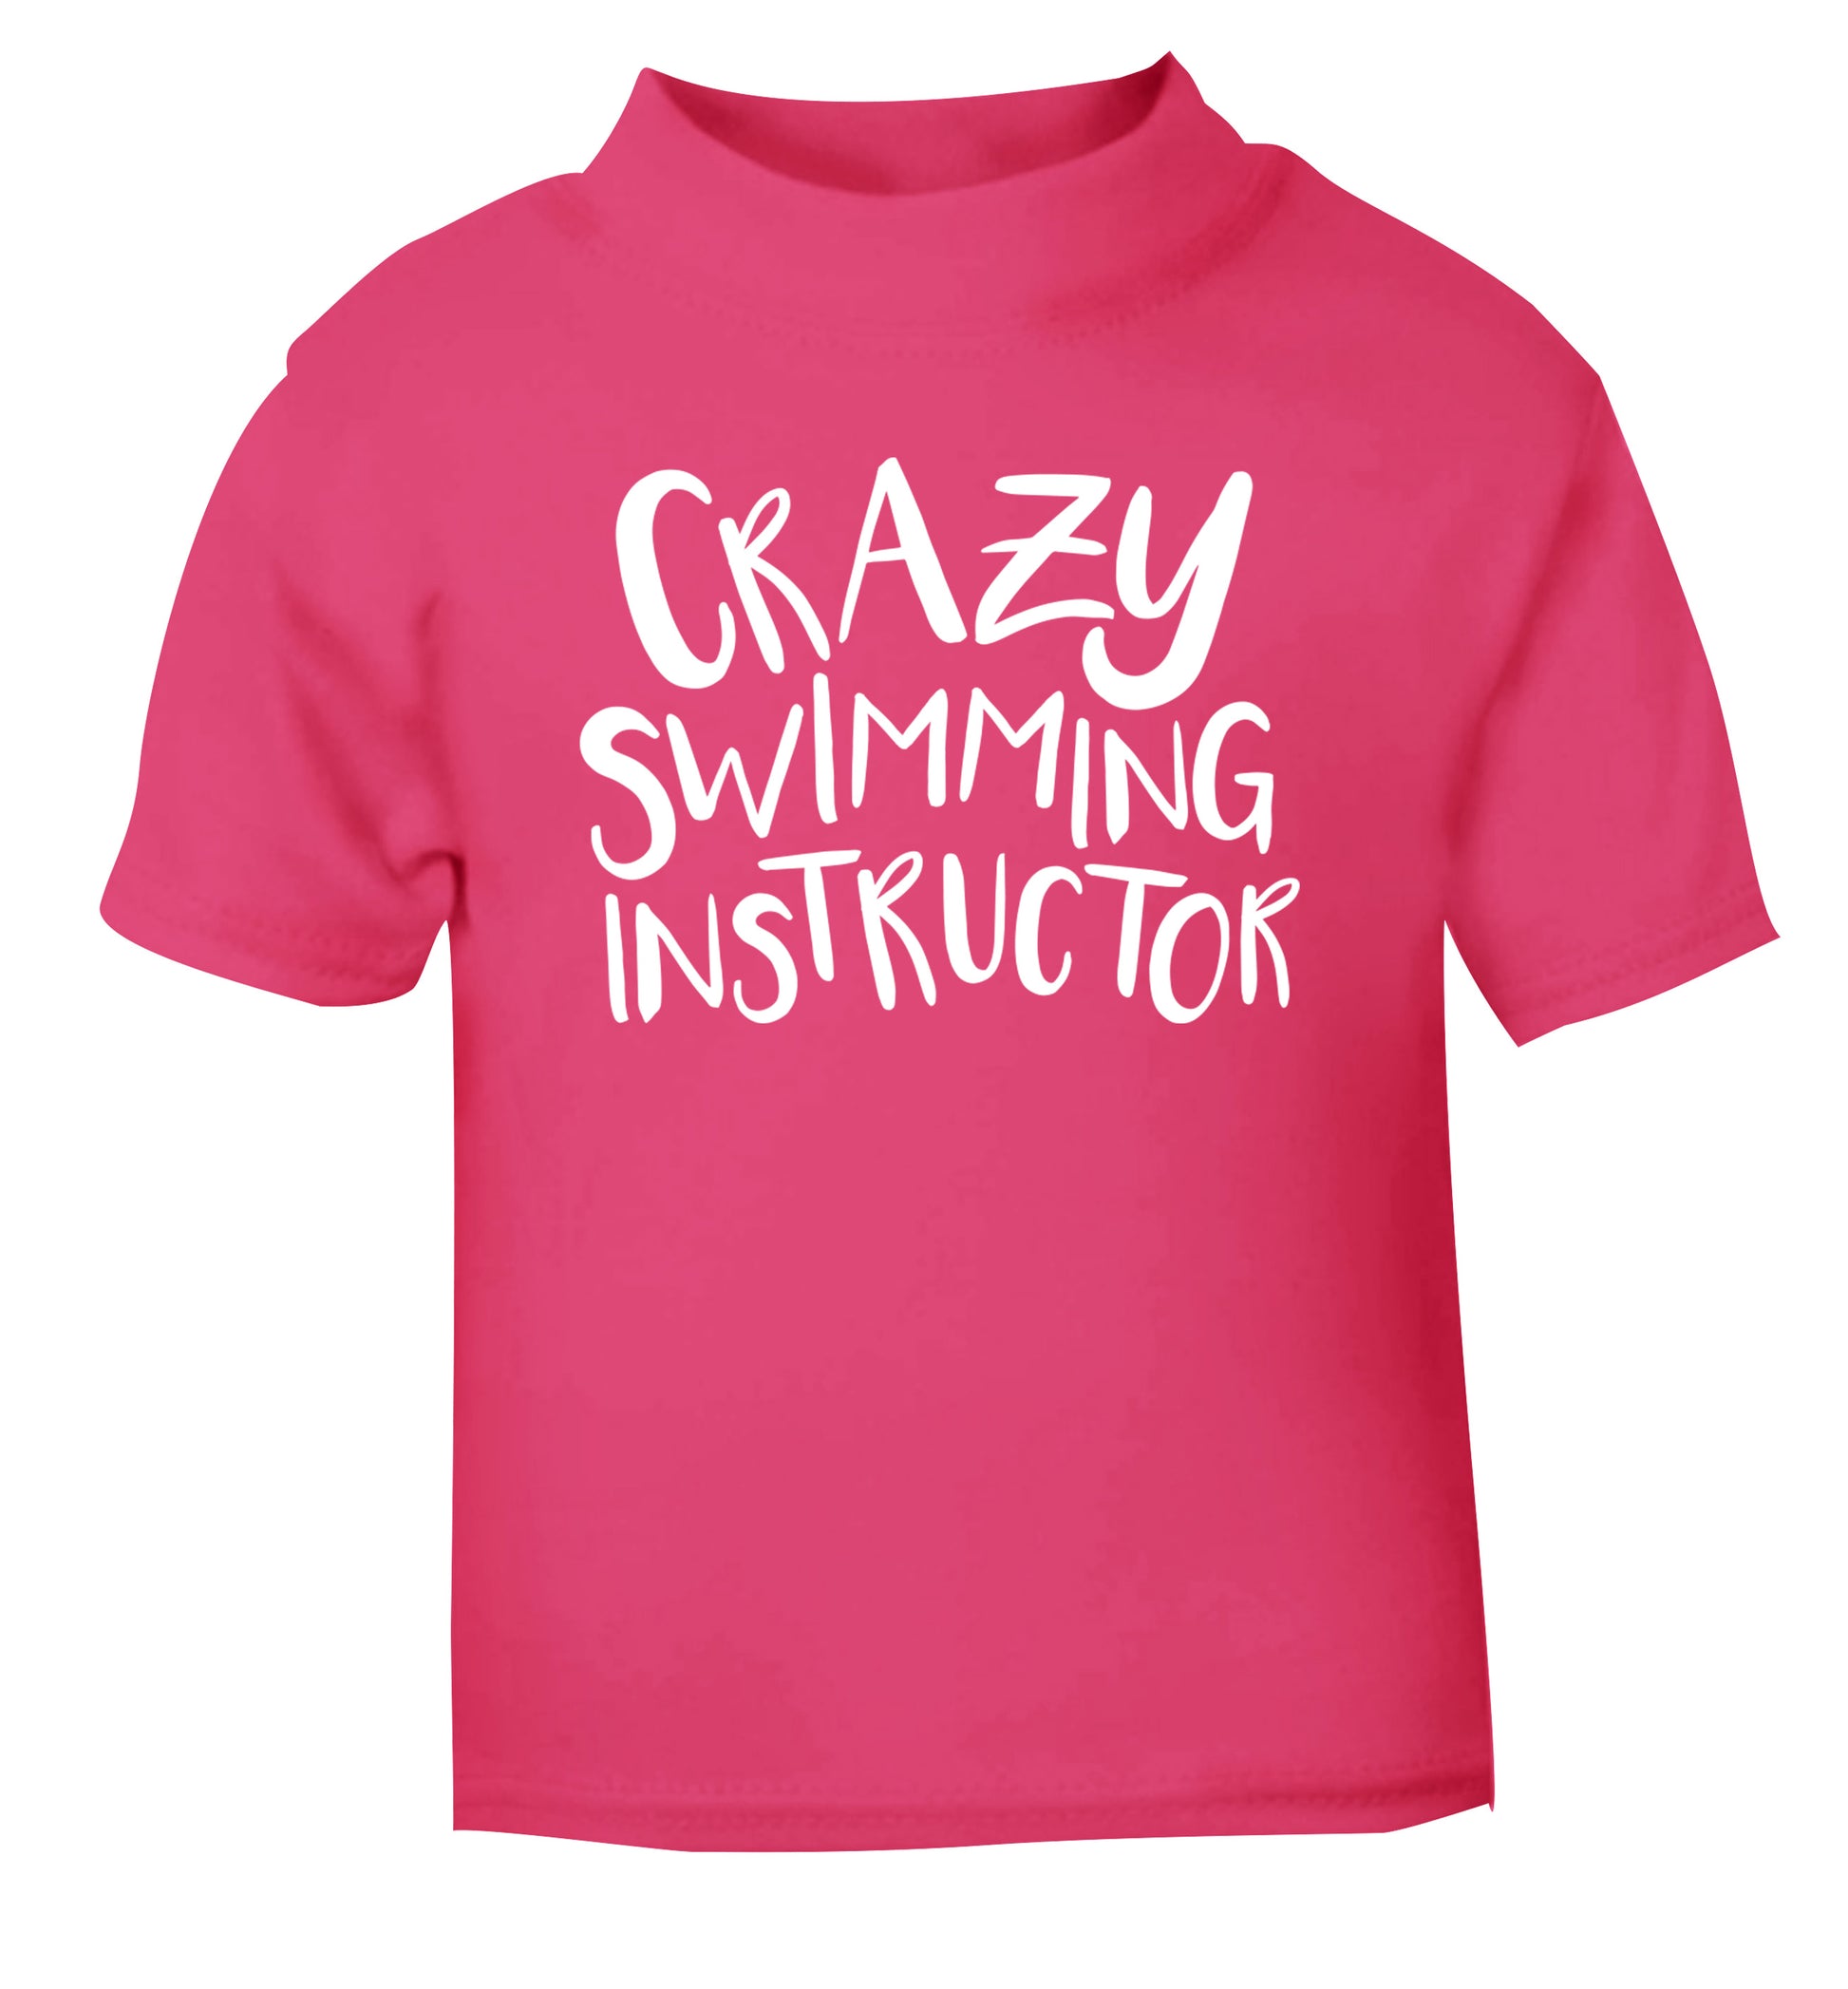 Crazy swimming instructor pink Baby Toddler Tshirt 2 Years